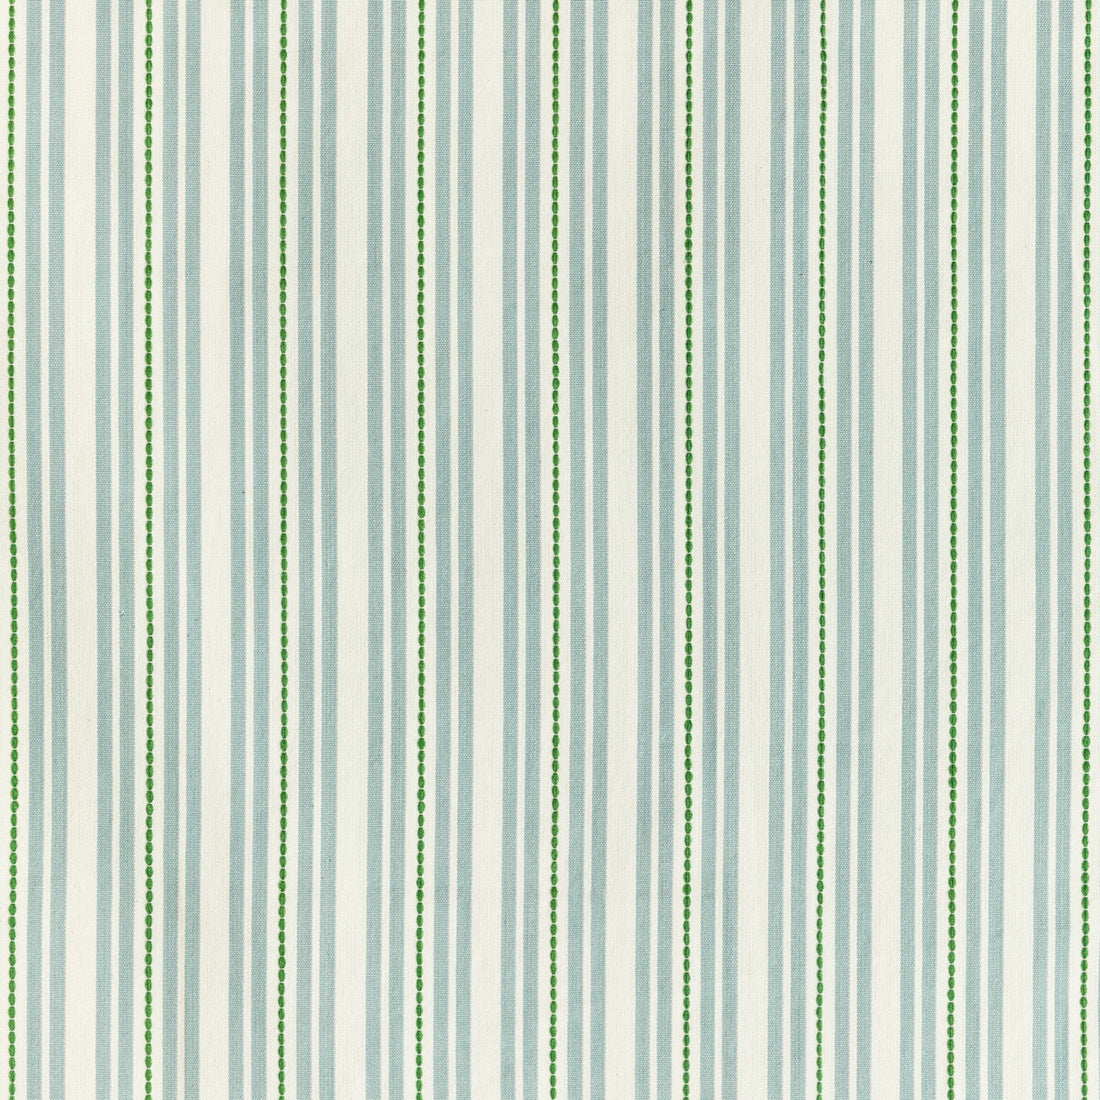 Basics fabric in 36046-135 color - pattern 36046.135.0 - by Kravet Basics in the L&